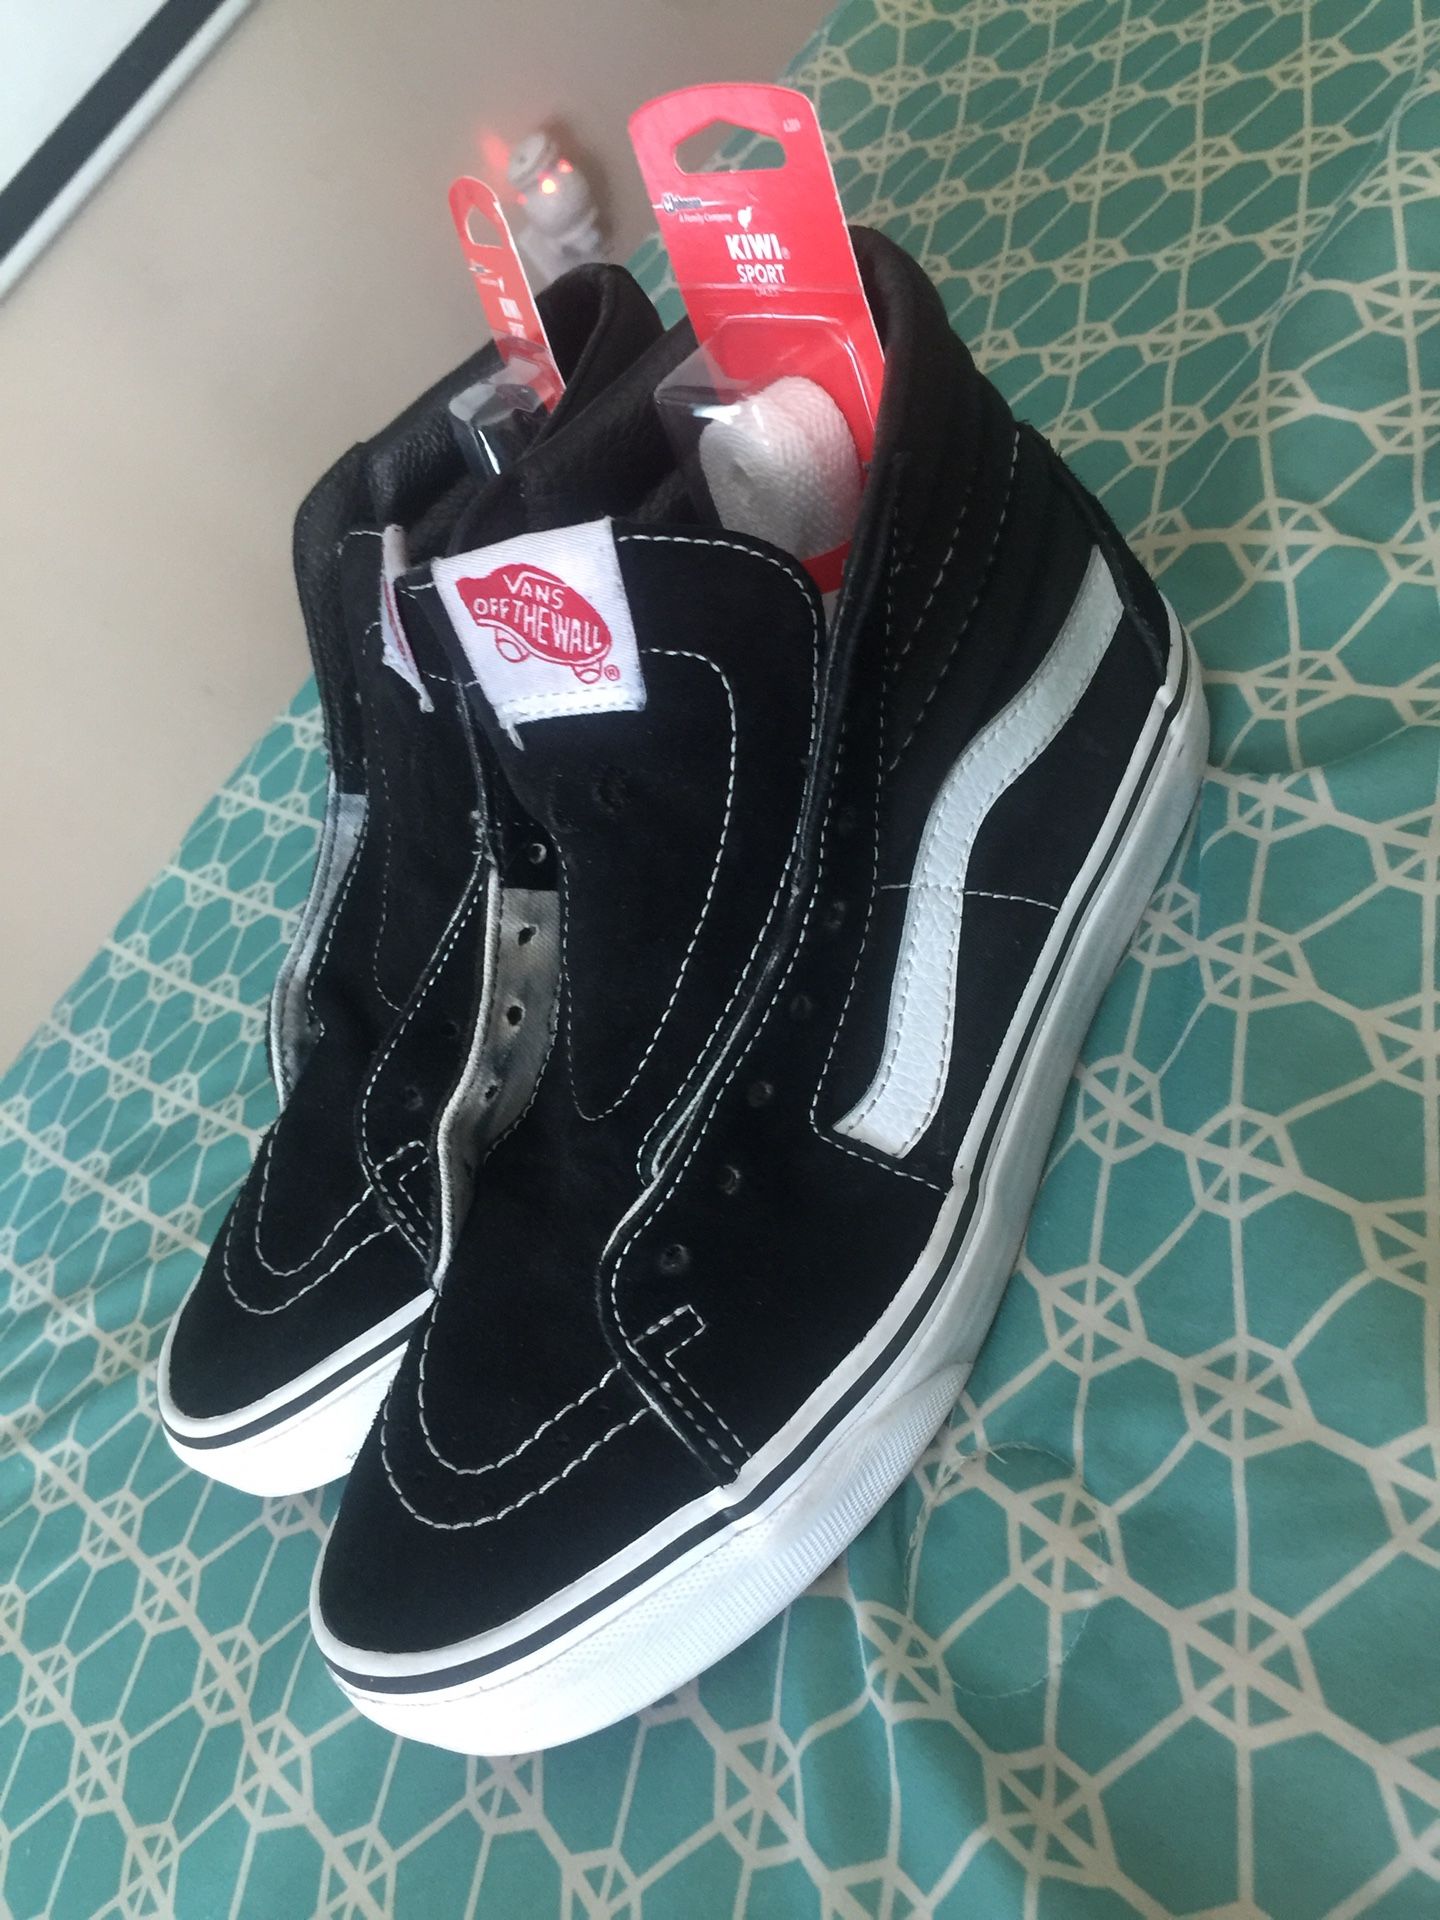 Vans size 6 in men 7.5 in women’s come with 2packs of brand new Shoes strings black and white